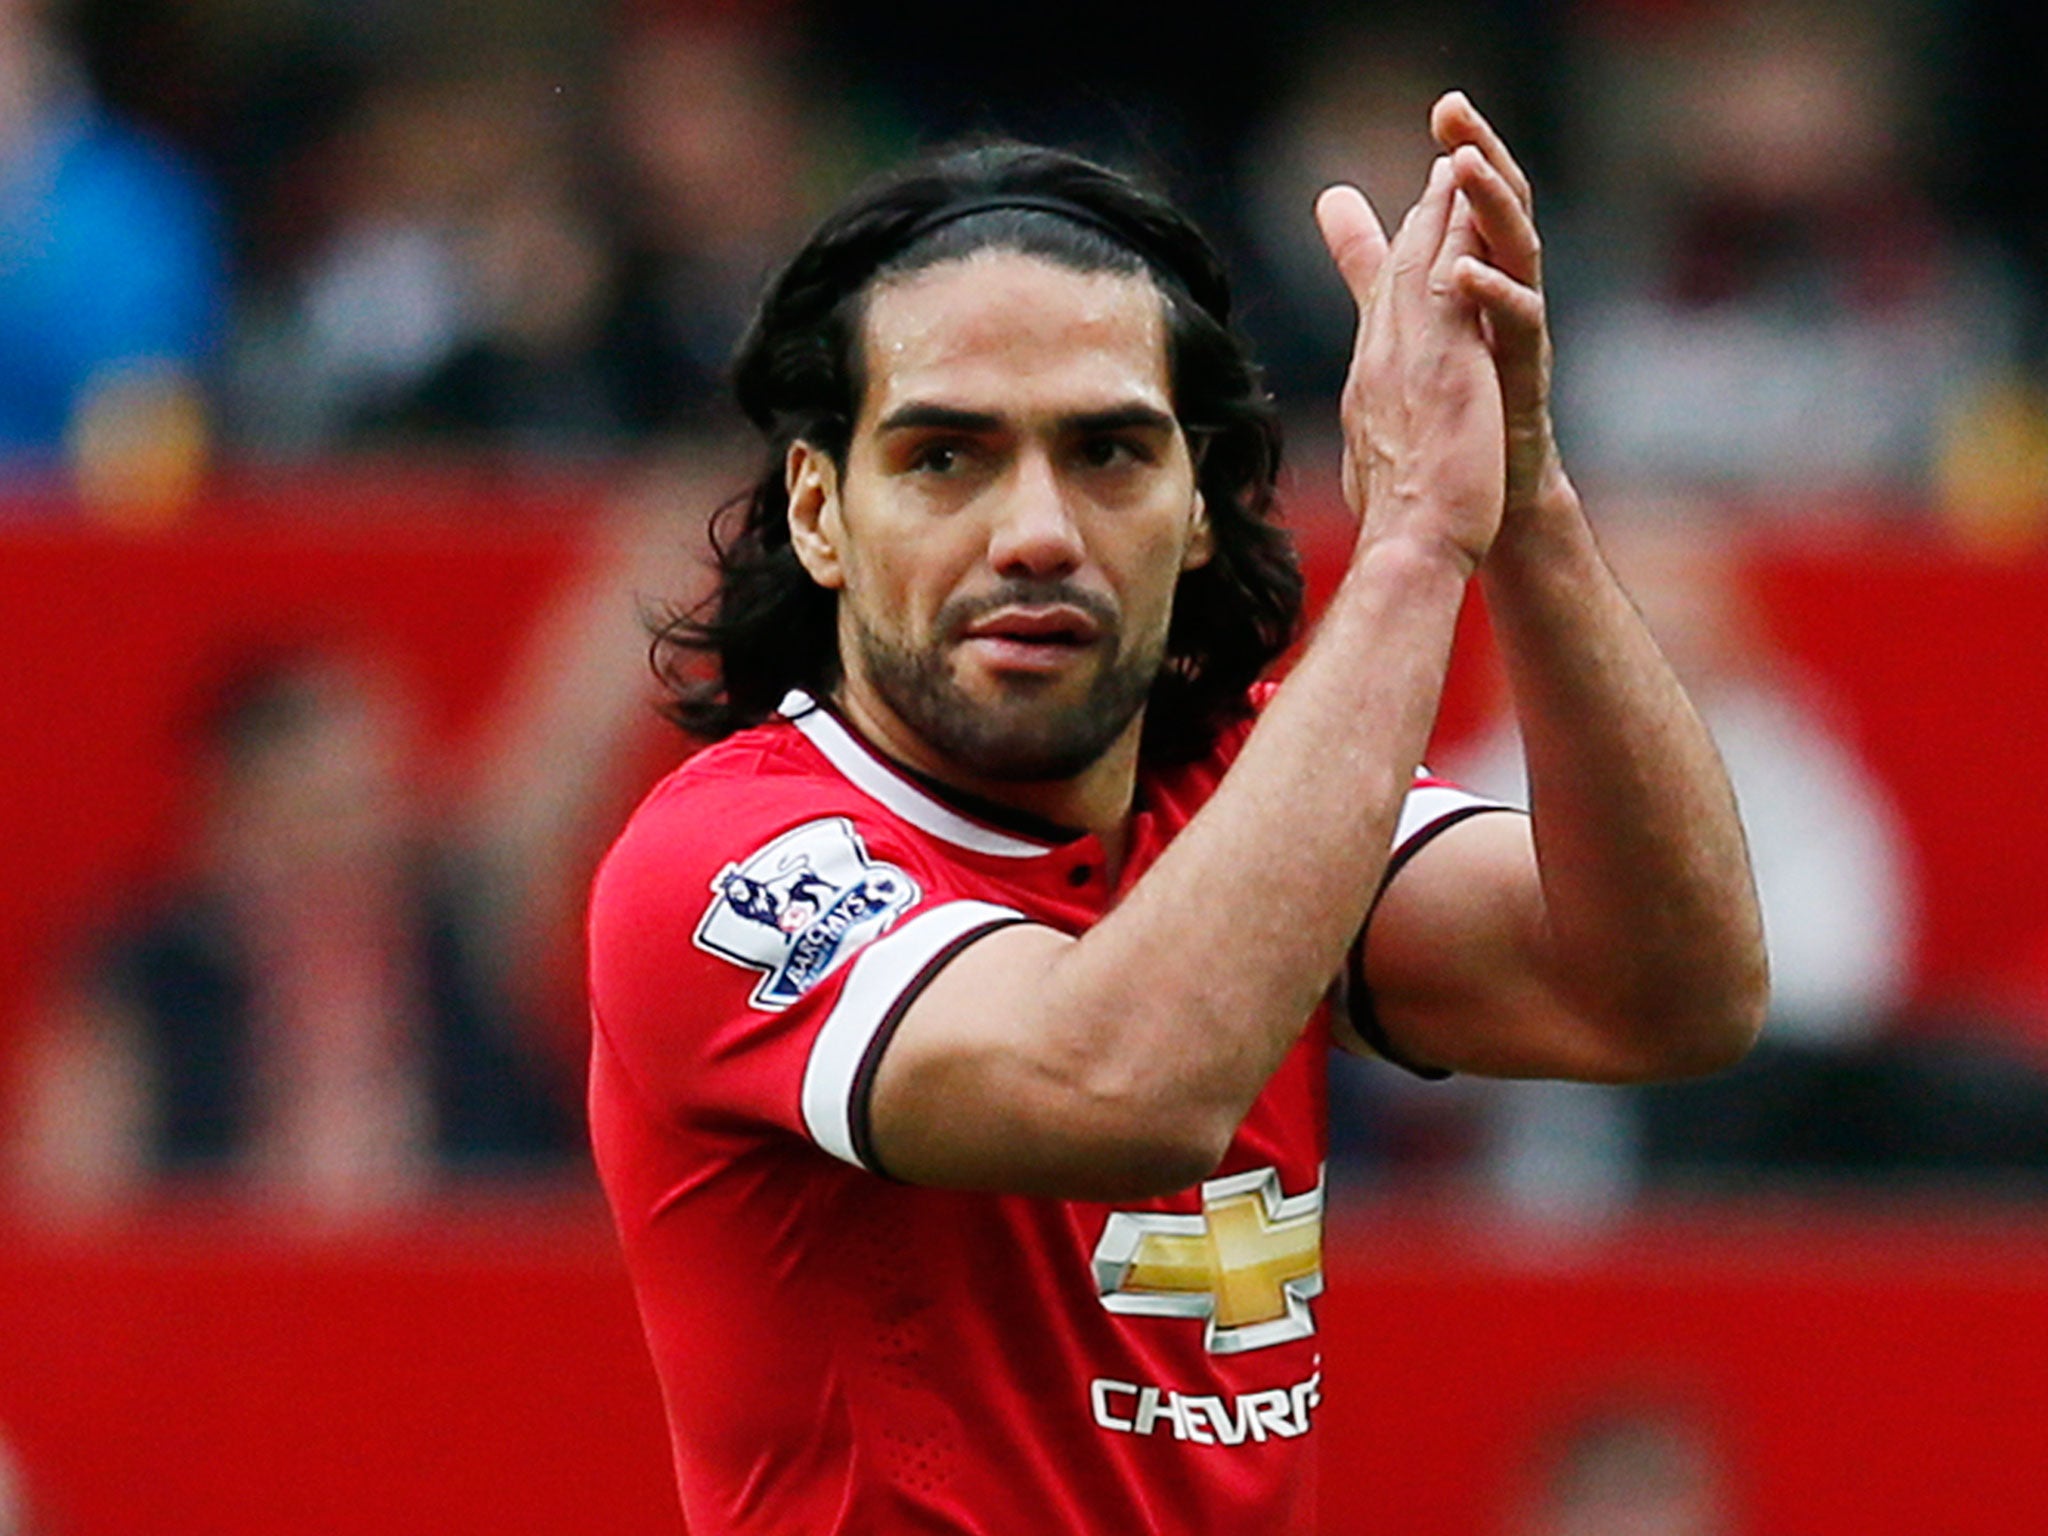 Radamel Falcao was again off the pace in what was likely to be his last home match for Manchester United